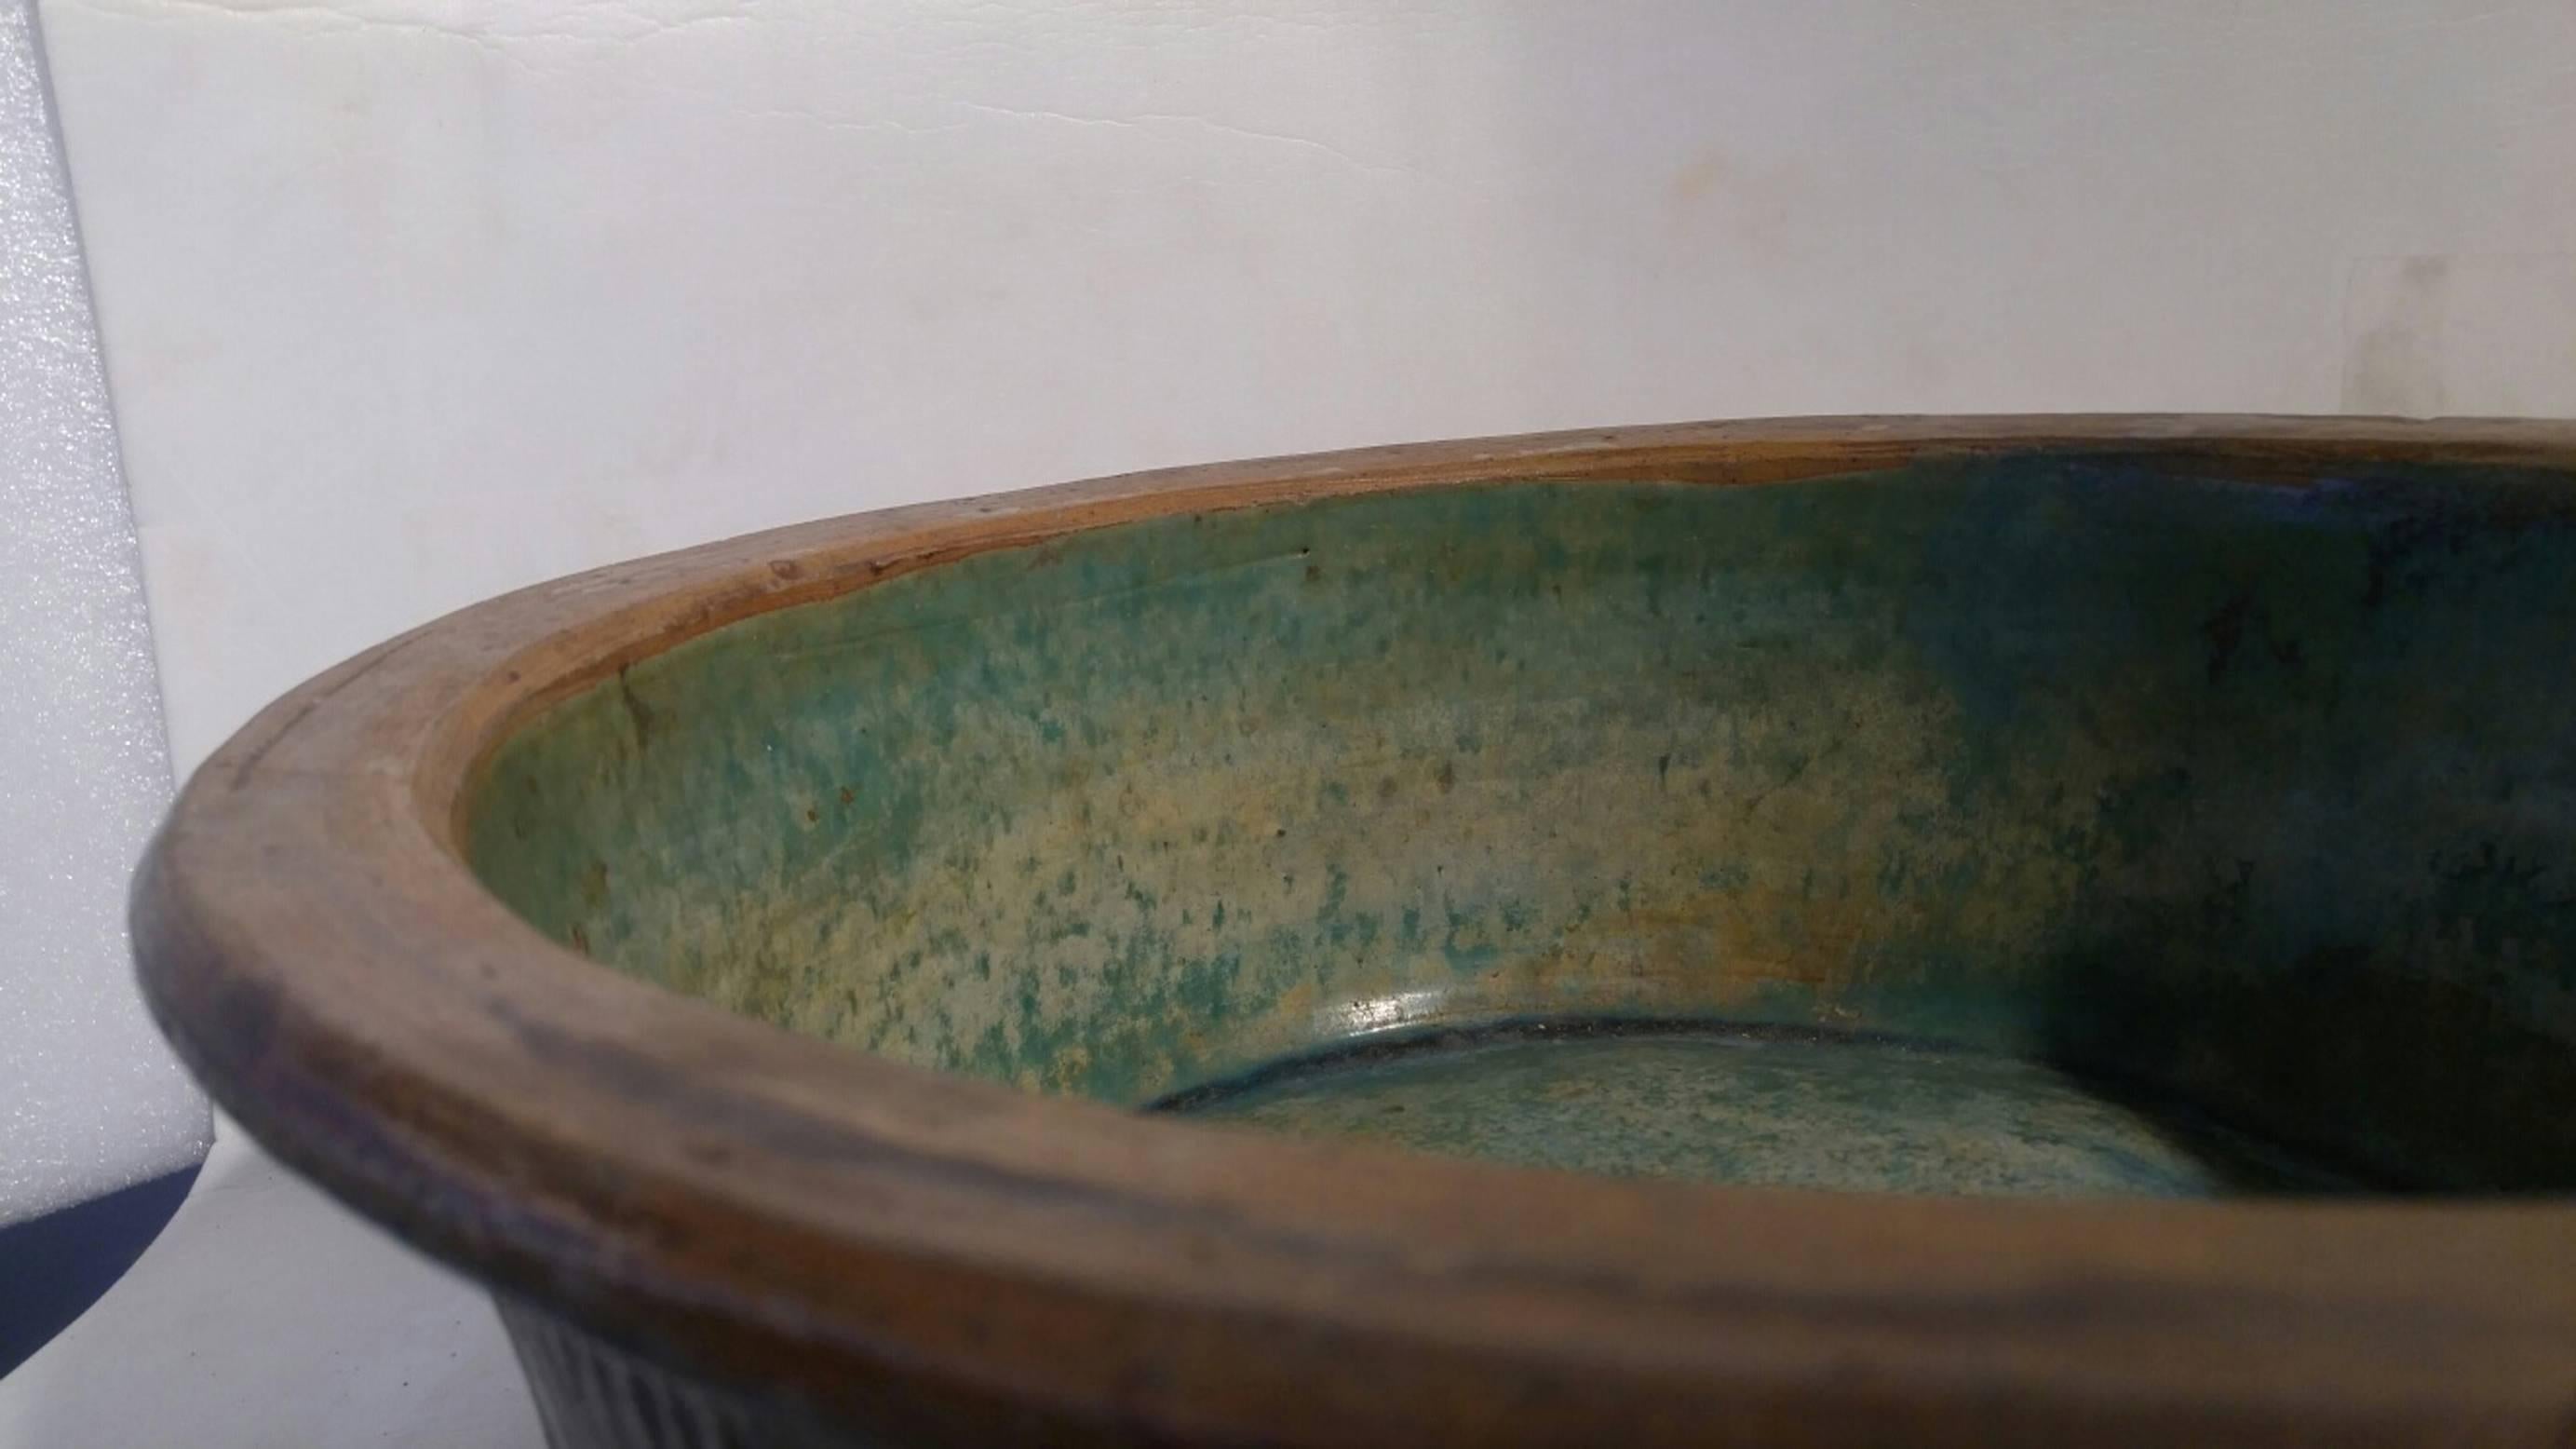 A tall and large ceramic bowl from Indonesia with brown ridged exterior and a green glazed interior.